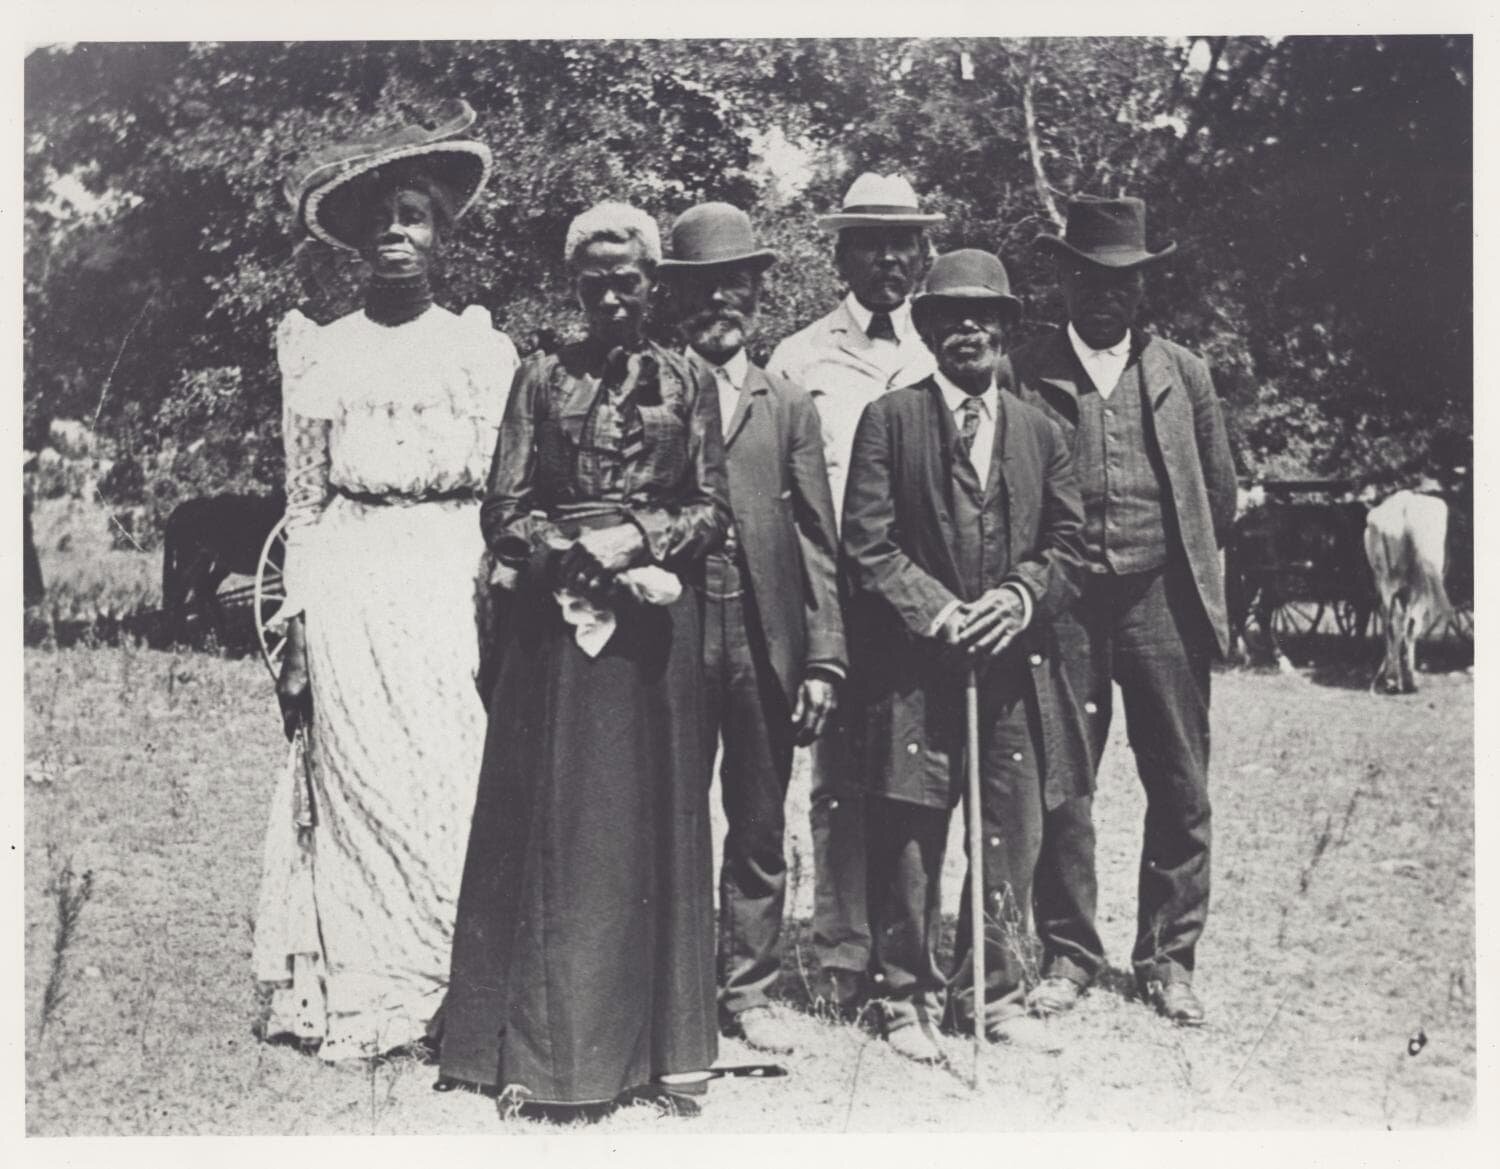 An early celebration of Emancipation Day (Juneteenth) in 1900.